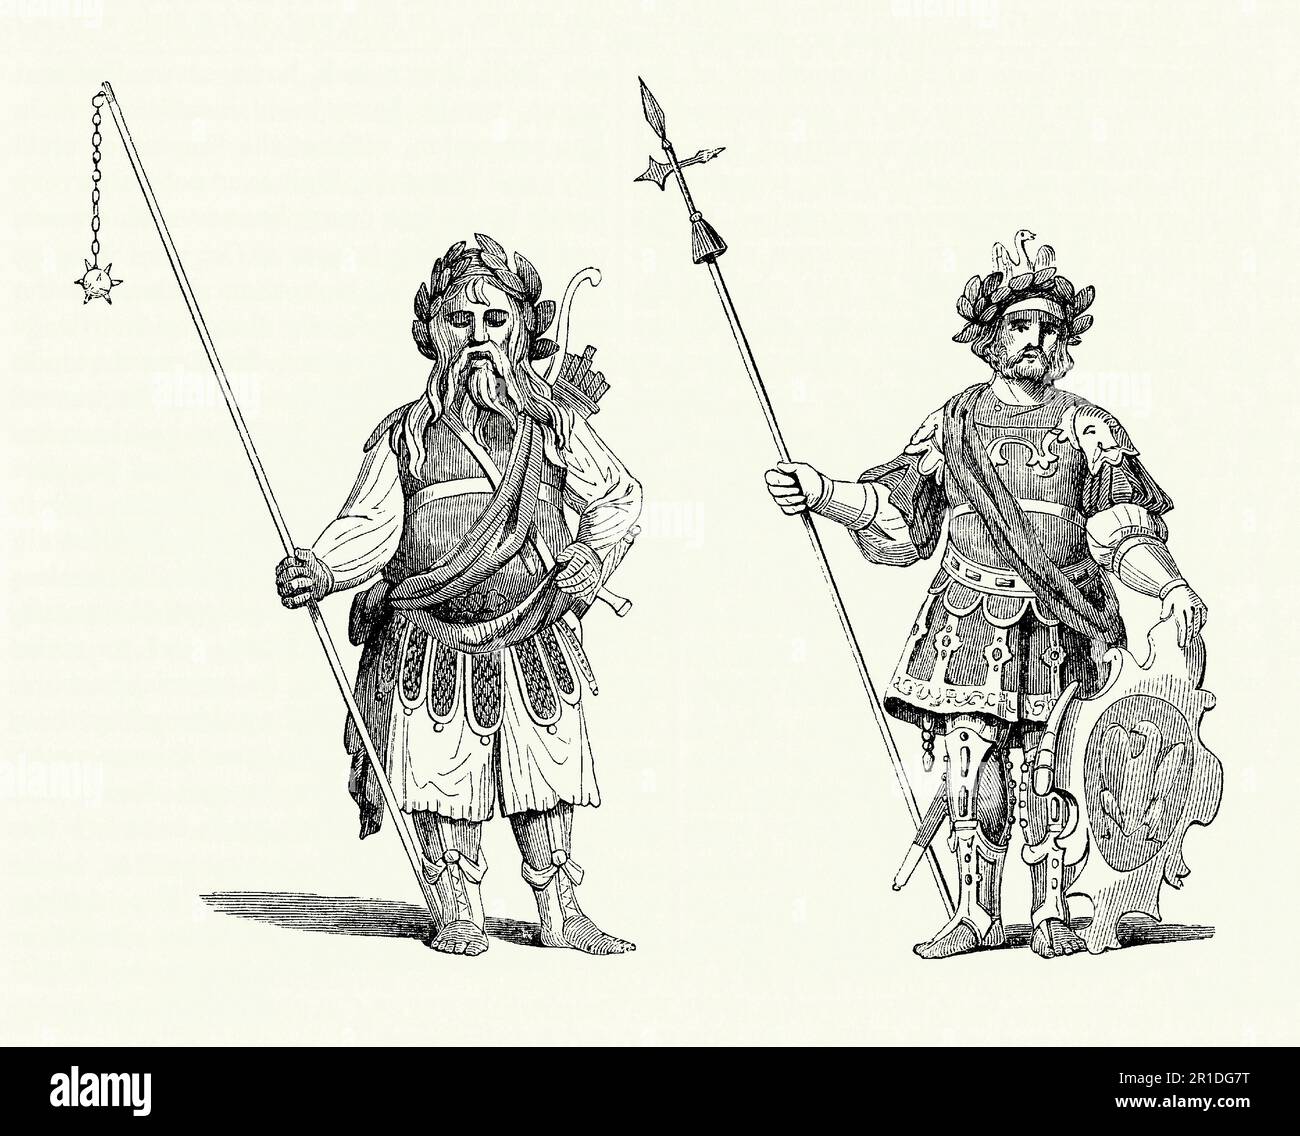 An old engraving of Gog and Magog c. 1600. Mythical giants Gog and Magog, appear in the Hebrew Bible and in the New Testament as the invader of Israel, evil forces opposed to the people of God. Although biblical references to Gog and Magog (also known as Corinaeus and Gogmagog) are few, they assumed an important place in early literature and medieval legend. These engravings are based on their wooden, statues in London’s Guildhall. Stock Photo